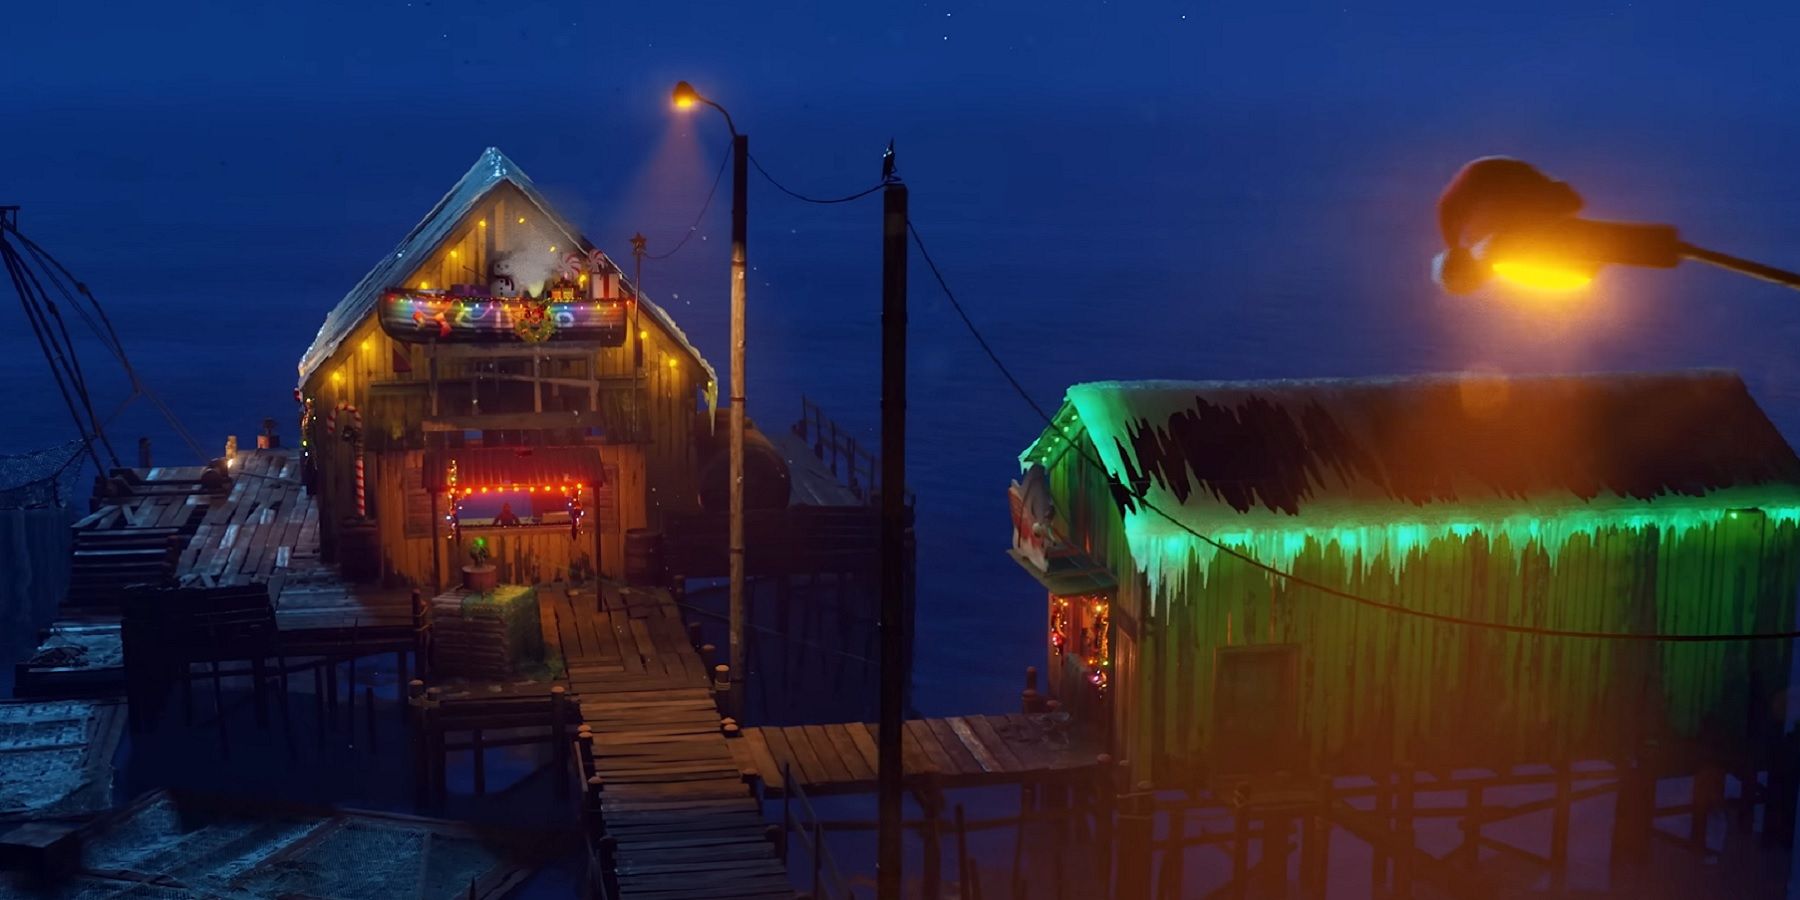 Image from Rust showing a Christmas decorated fishing dock.